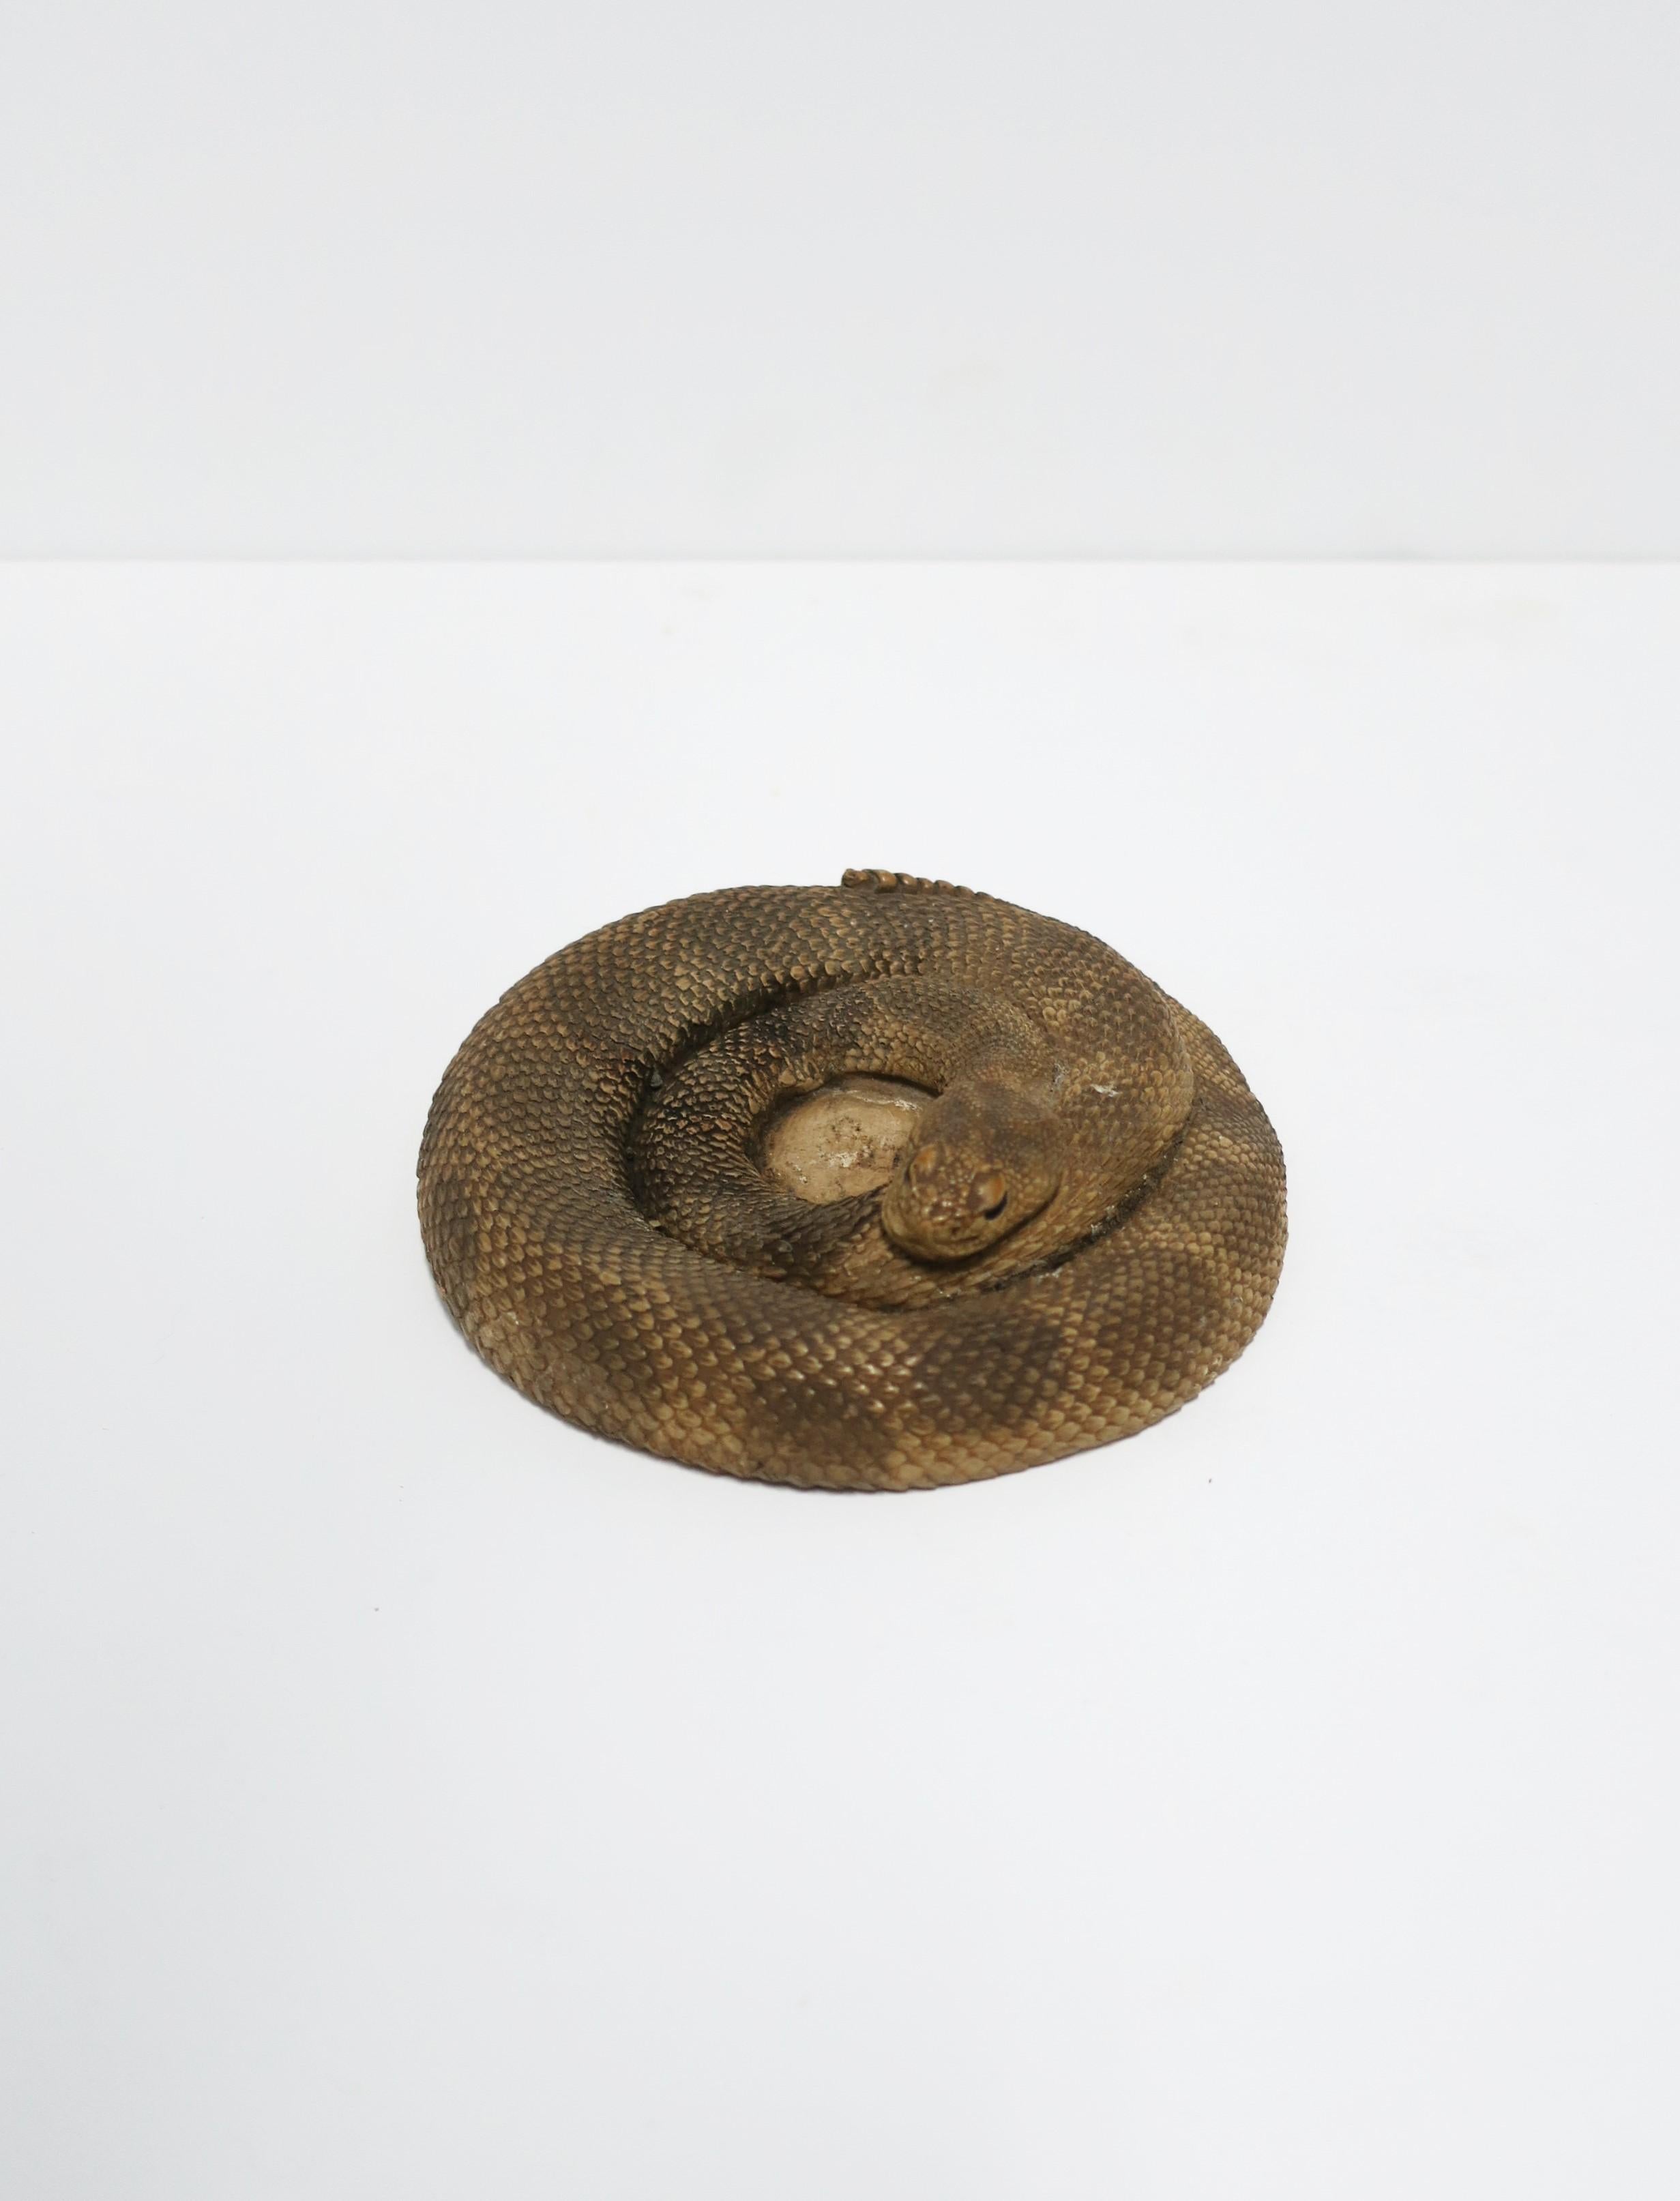 Ceramic Coiled Rattle Snake, circa 1980s USA For Sale